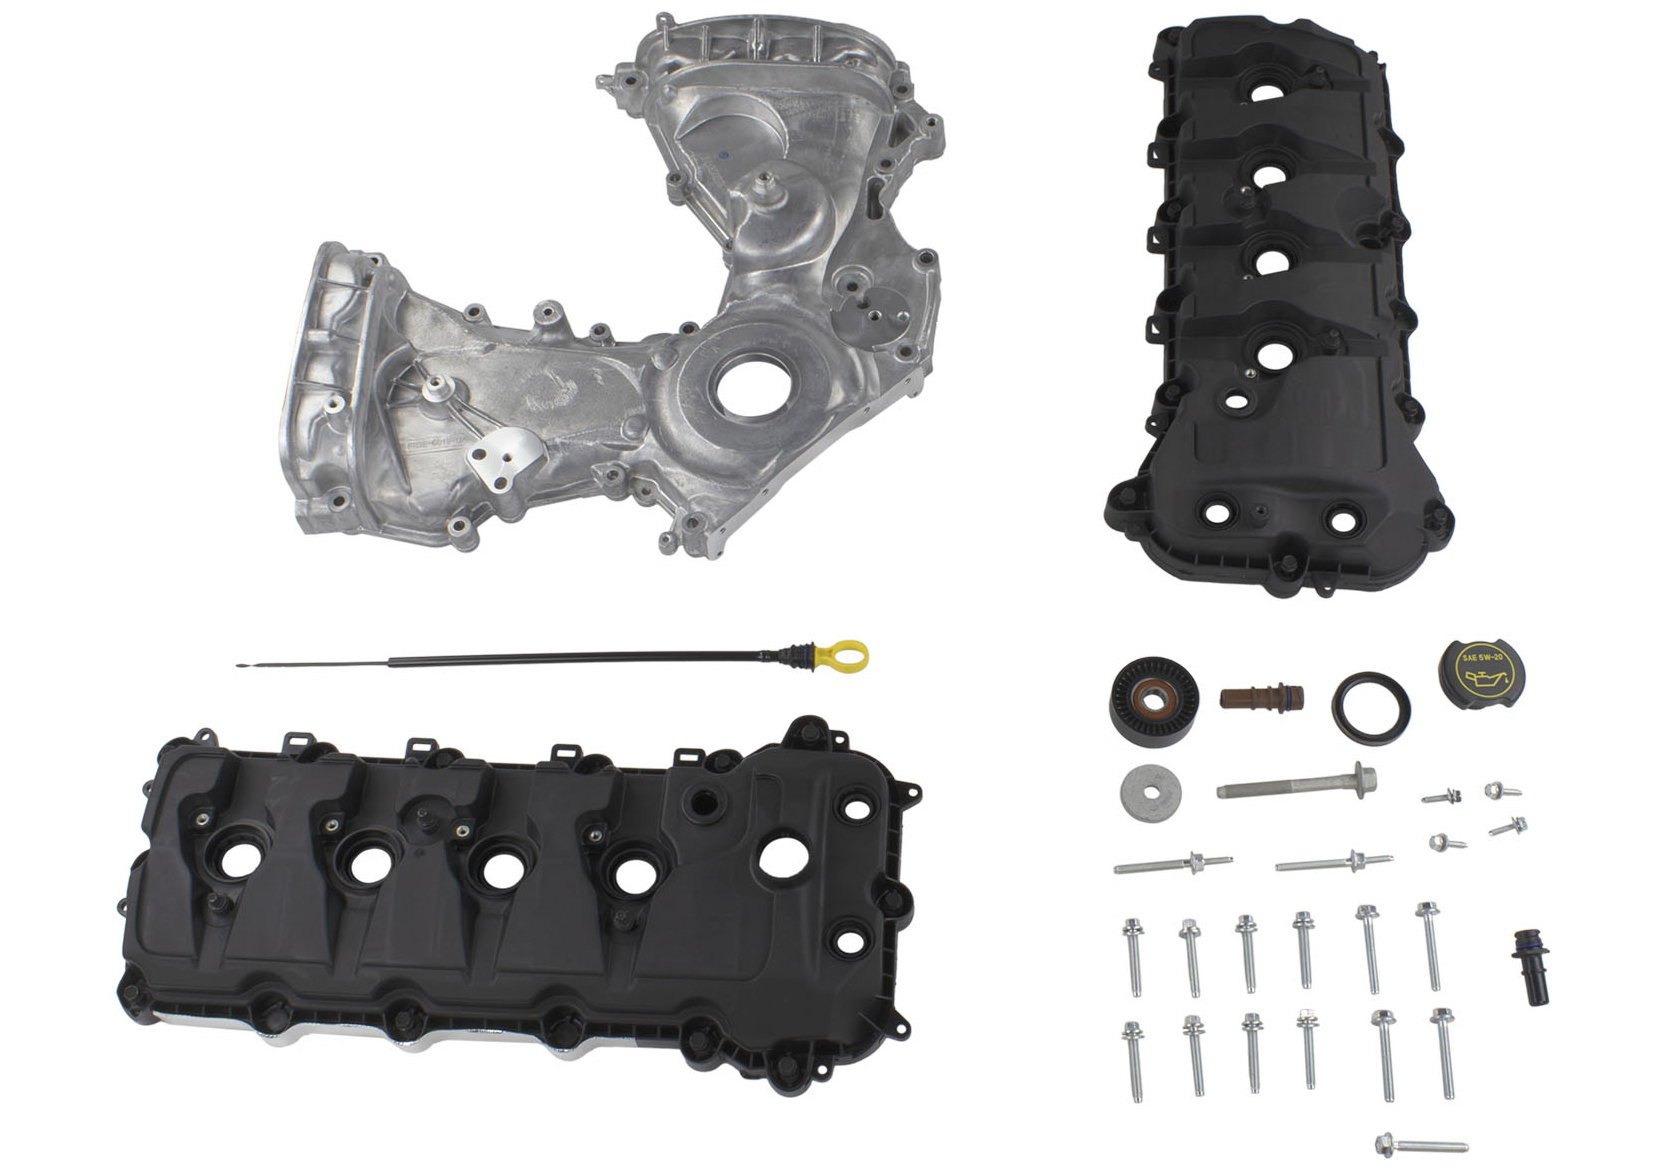 5.0L COYOTE TIMING/FRONT COVER AND CAM COVER KIT| Part Details for